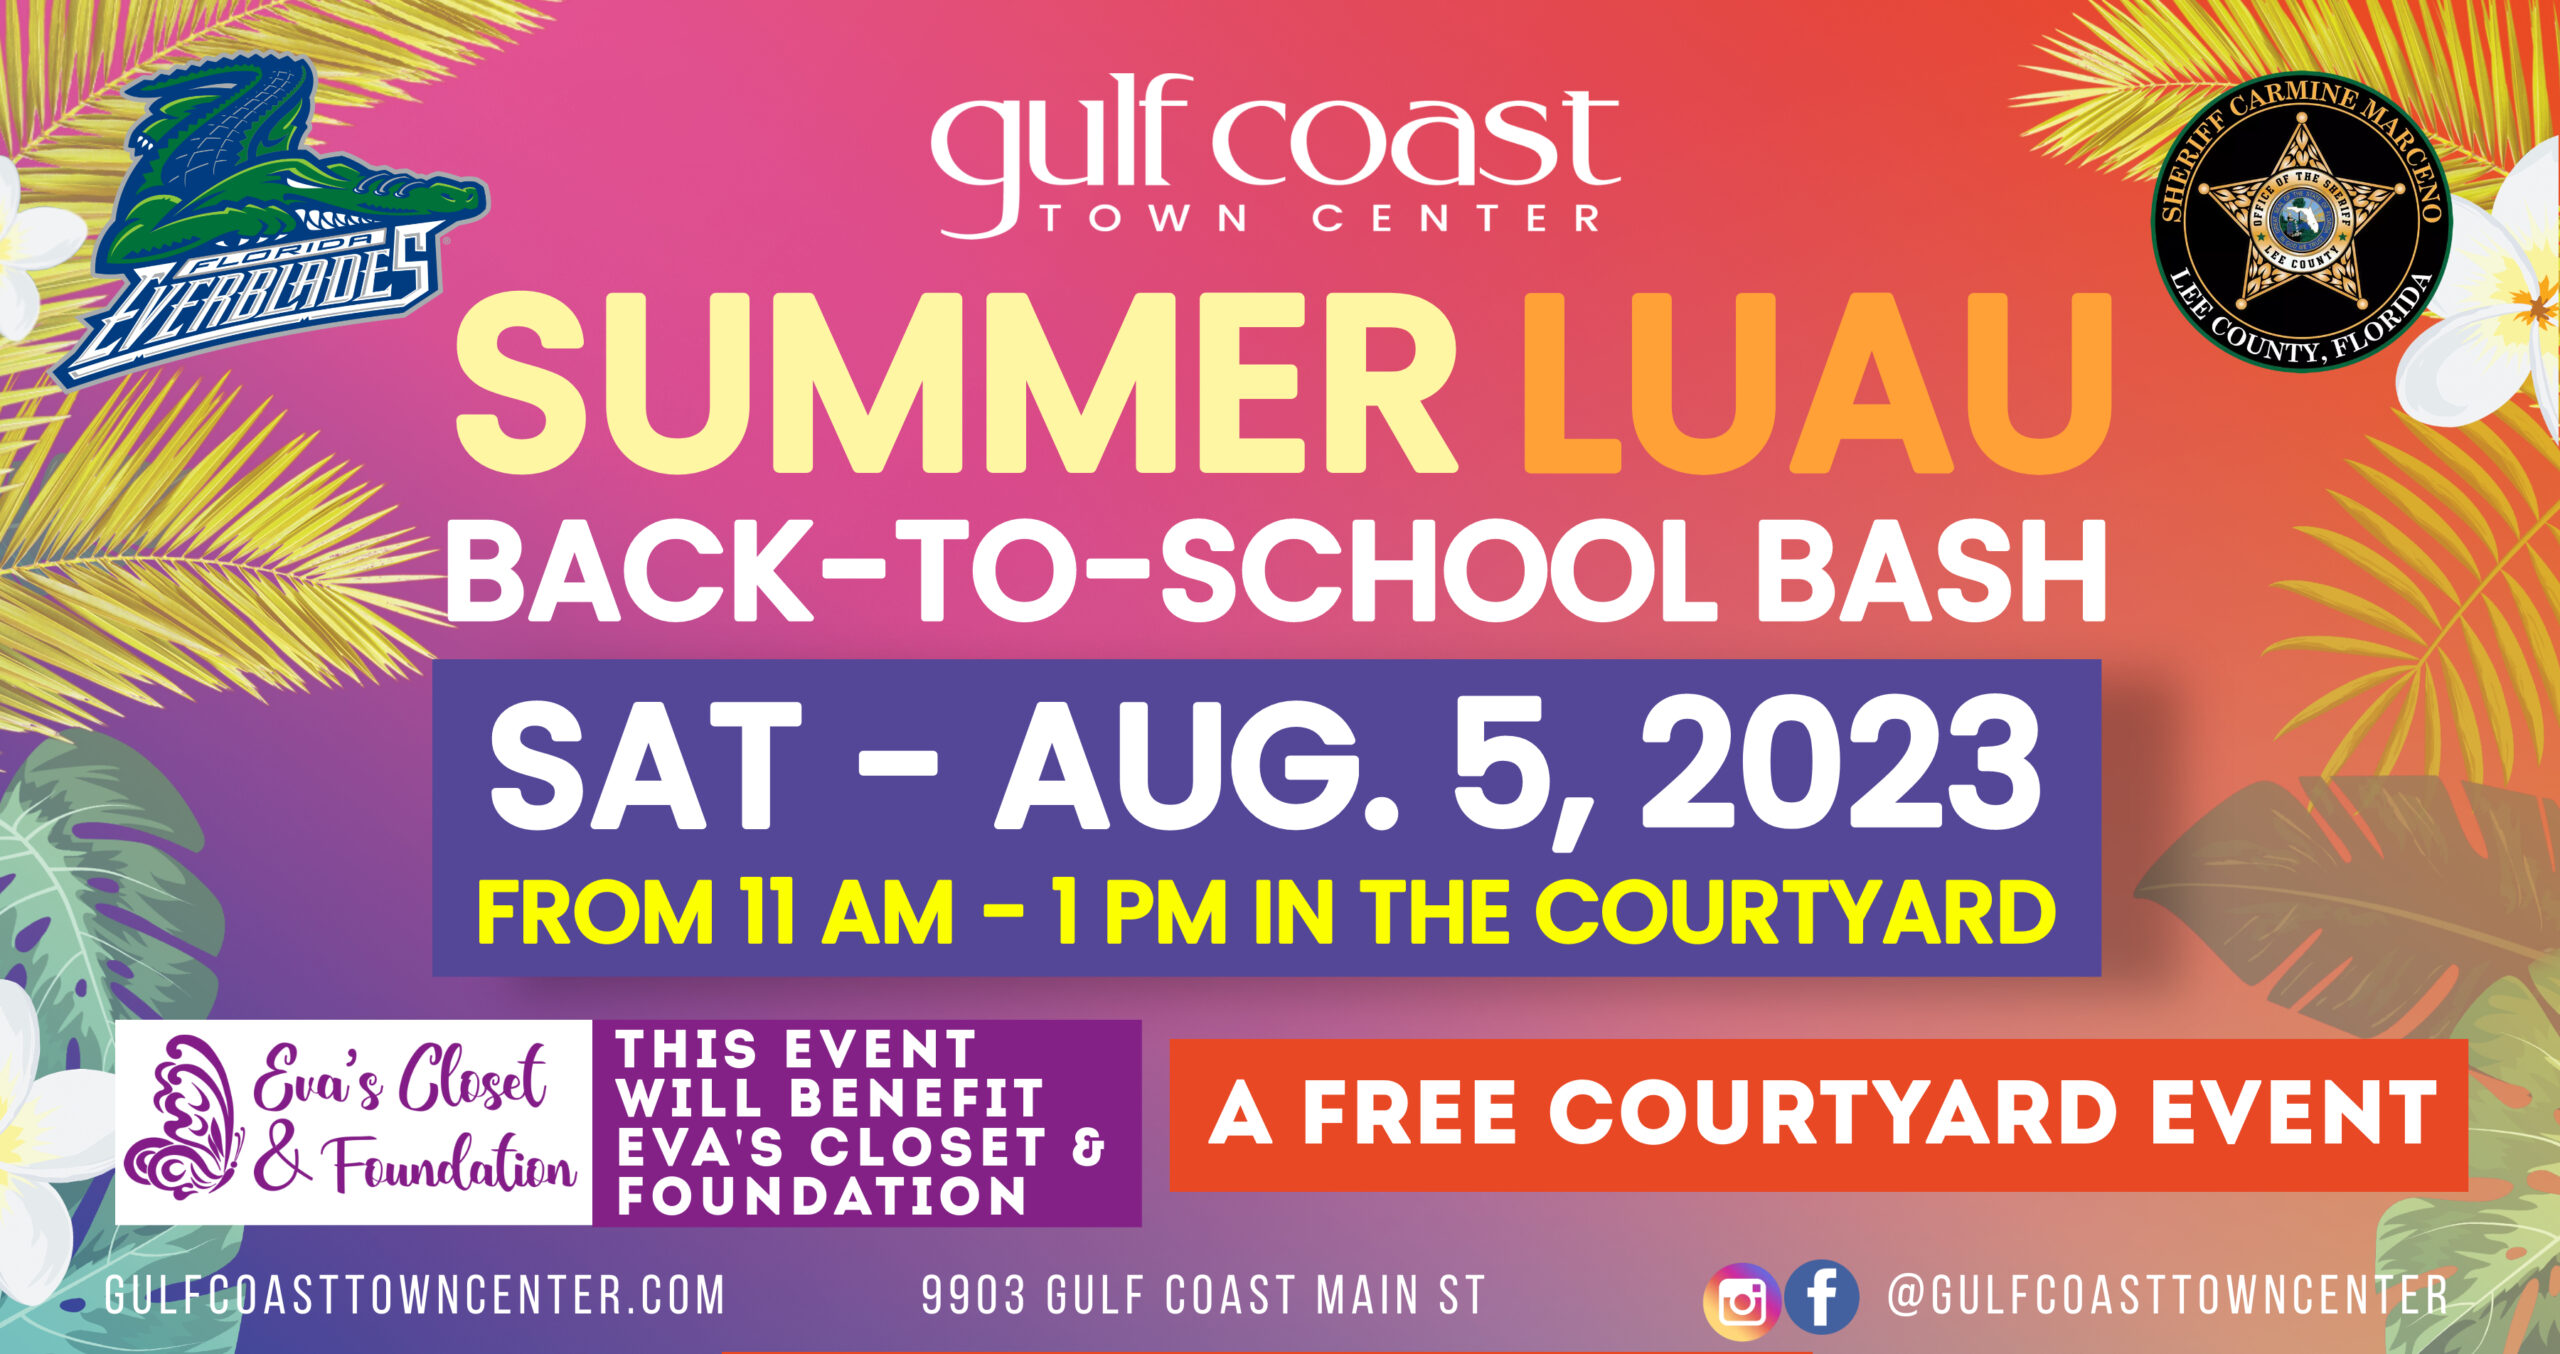 Back to School Bash at Tanger Outlets Hwy 501 - August 27, 2022